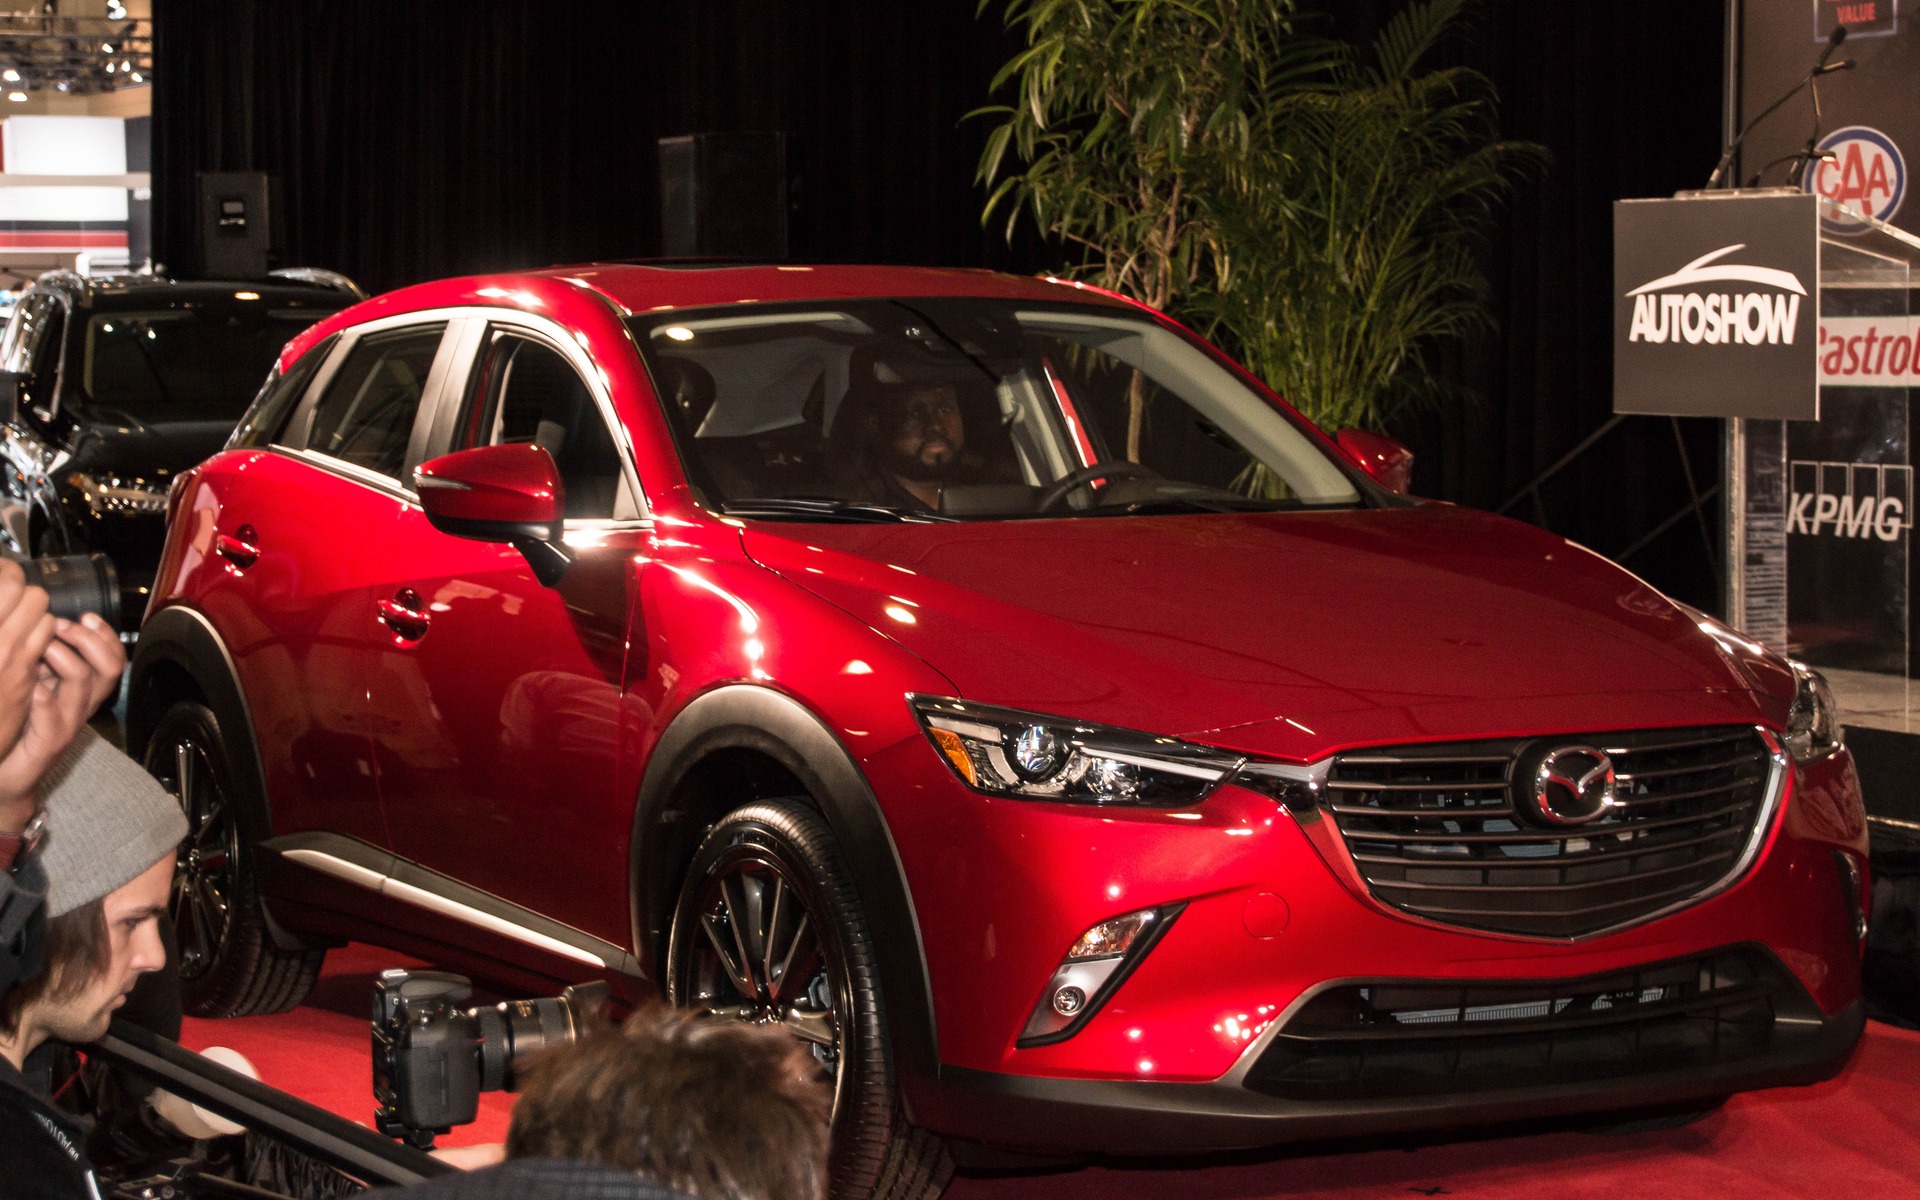 2016 Mazda CX-3, AJAC's Canadian Utility Vehicle of the Year.